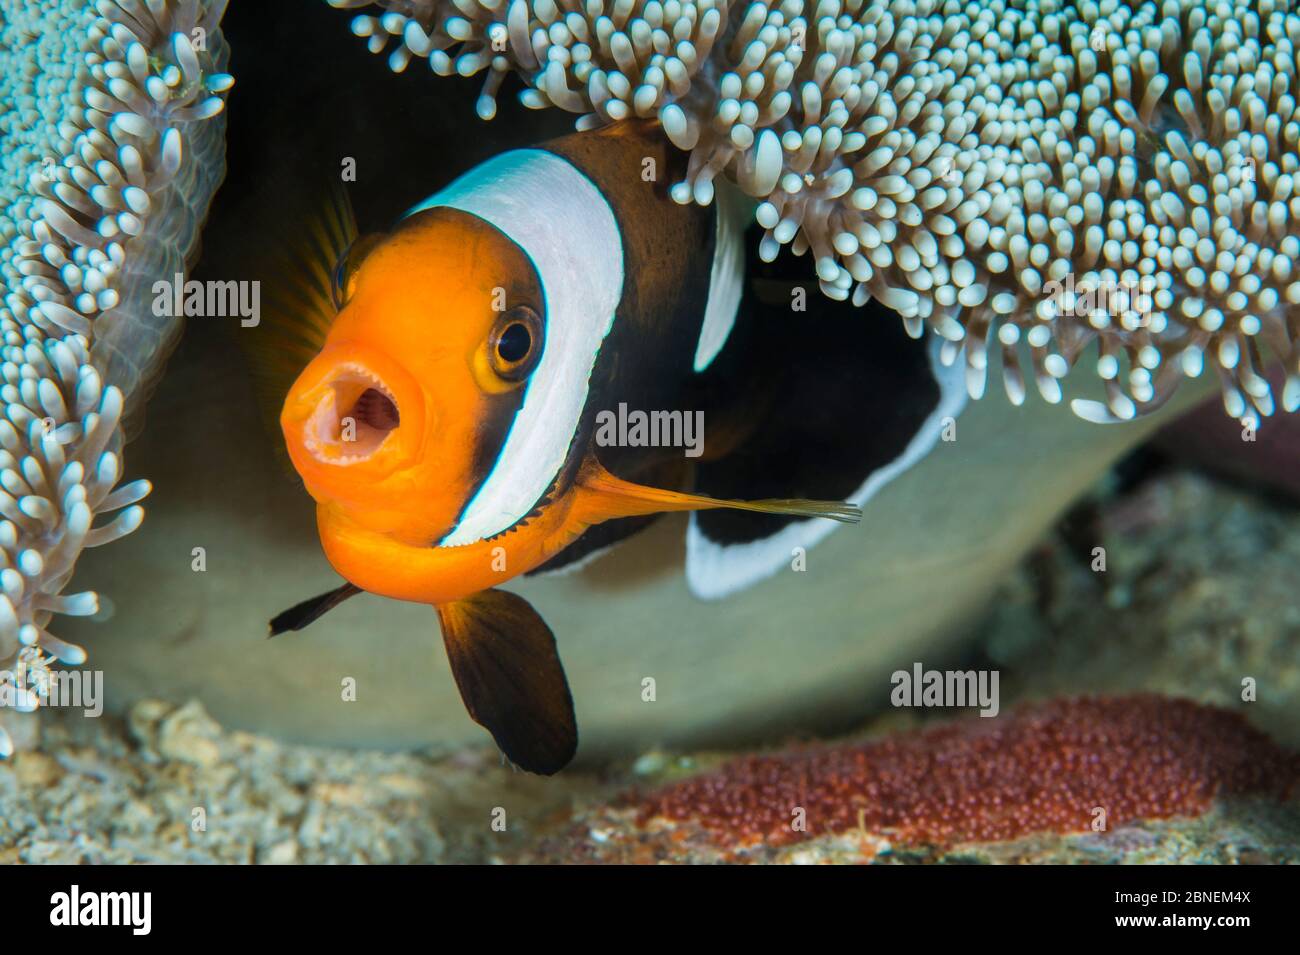 Saddleback anemonefish (Amphiprion polymnus) female barks as she guards her clutch of eggs, laid beneath her host anemone. Anilao, Batangas, Luzon, Ph Stock Photo